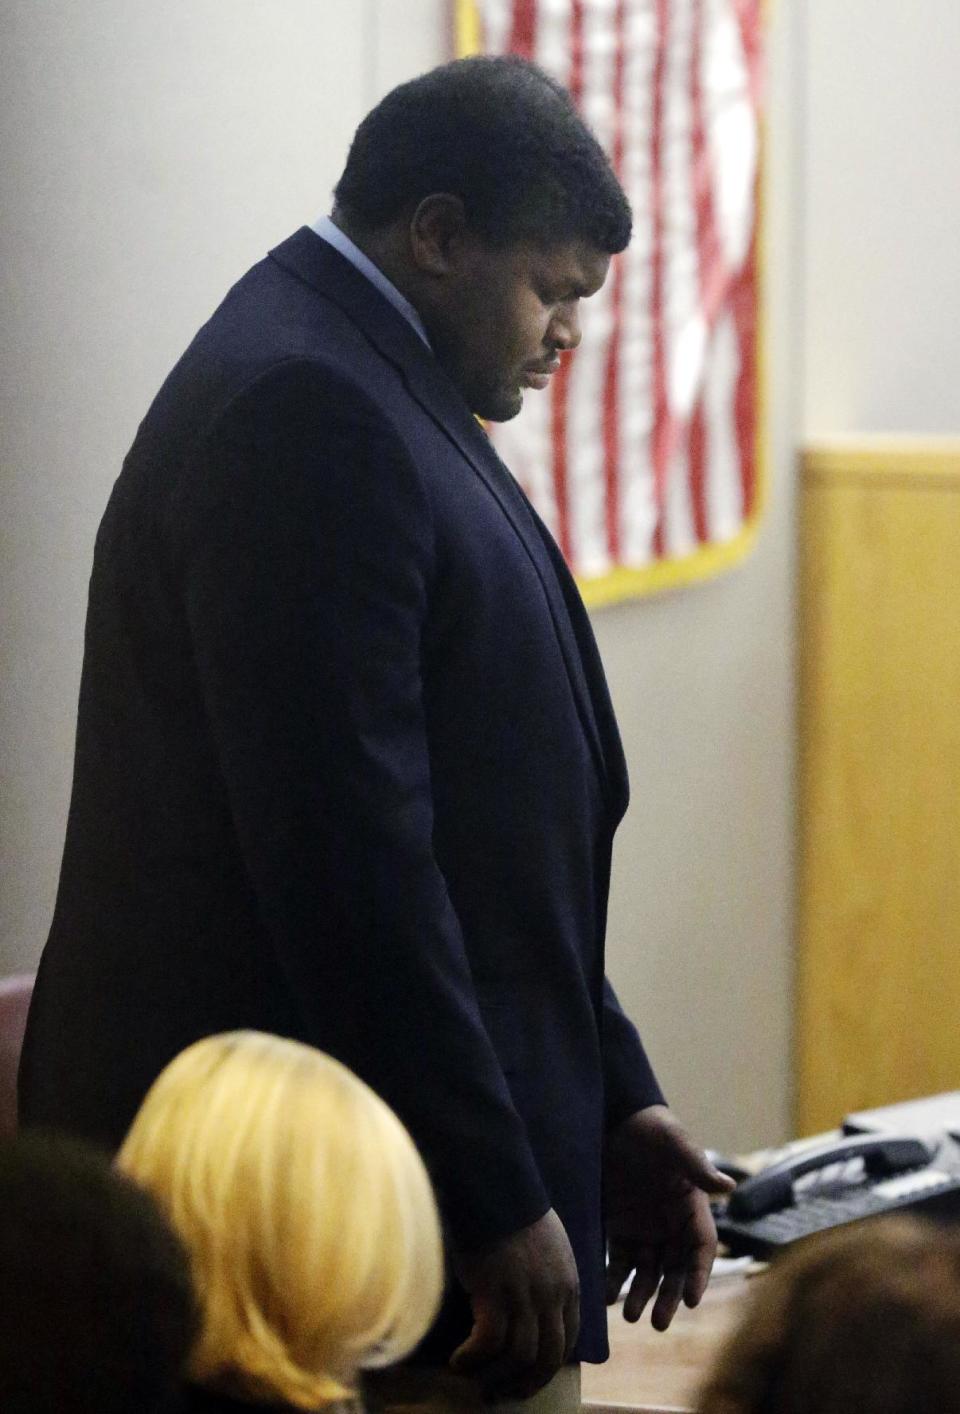 Former Dallas Cowboys Josh Brent bows his head as he walks into court during the penalty phase of the intoxication manslaughter trial in Dallas, Thursday, Jan. 23, 2014. Brent was found guilty on Wednesday, of intoxication manslaughter and faces probation to 20 years for a fiery wreck that killed his teammate and close friend Jerry Brown. (AP Photo/LM Otero)